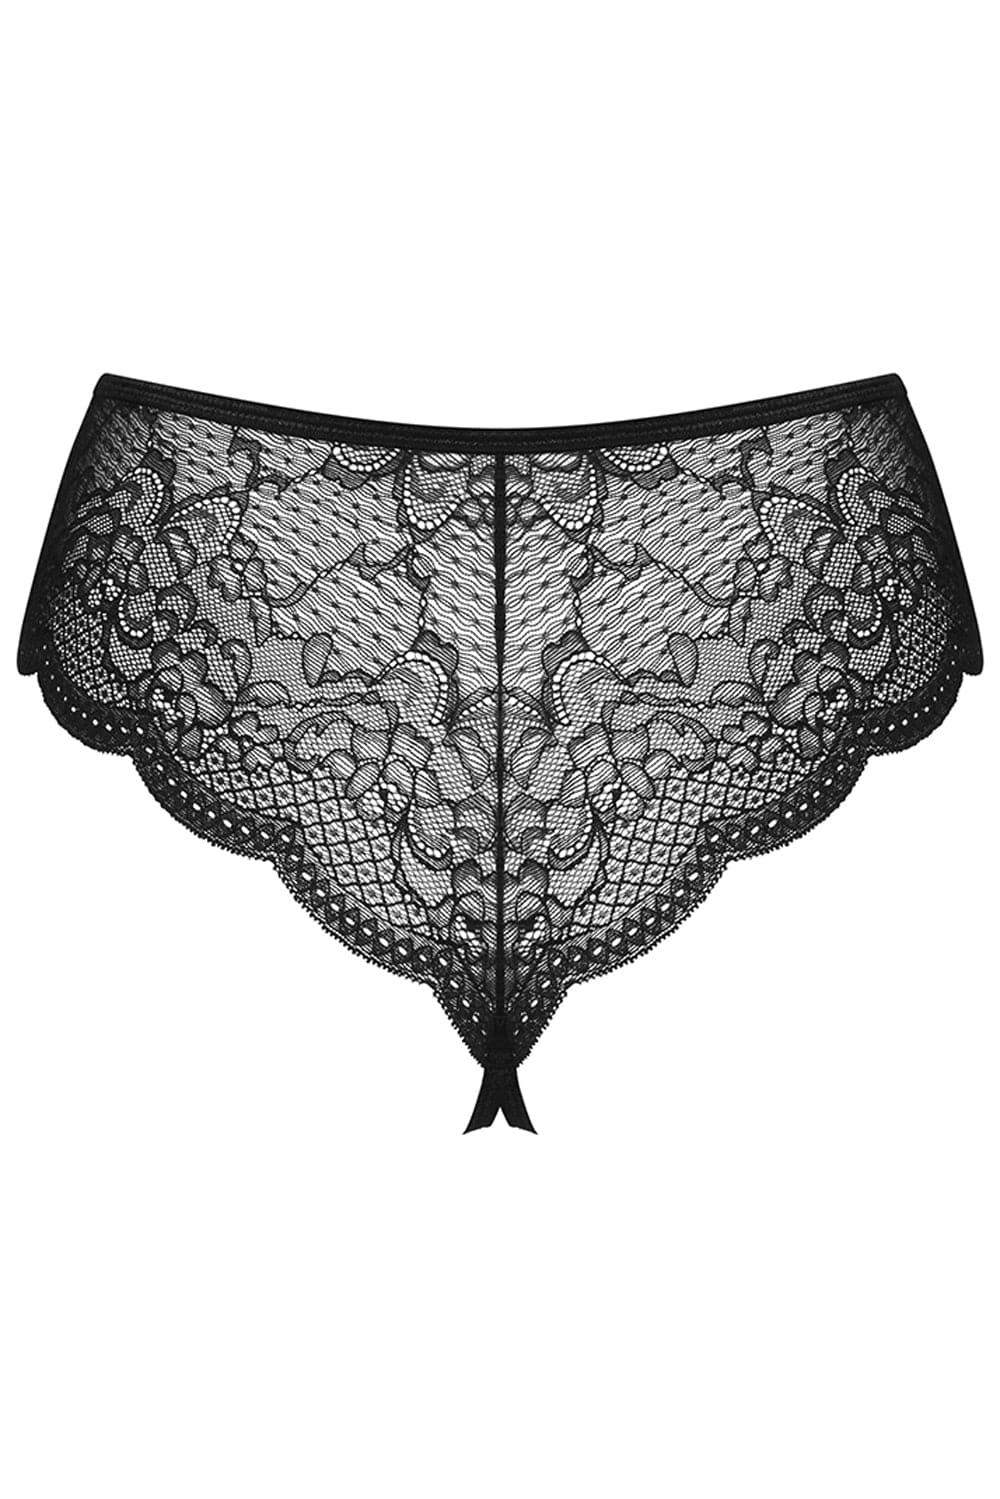 Obsessive Pearlove Crotchless Brief Black